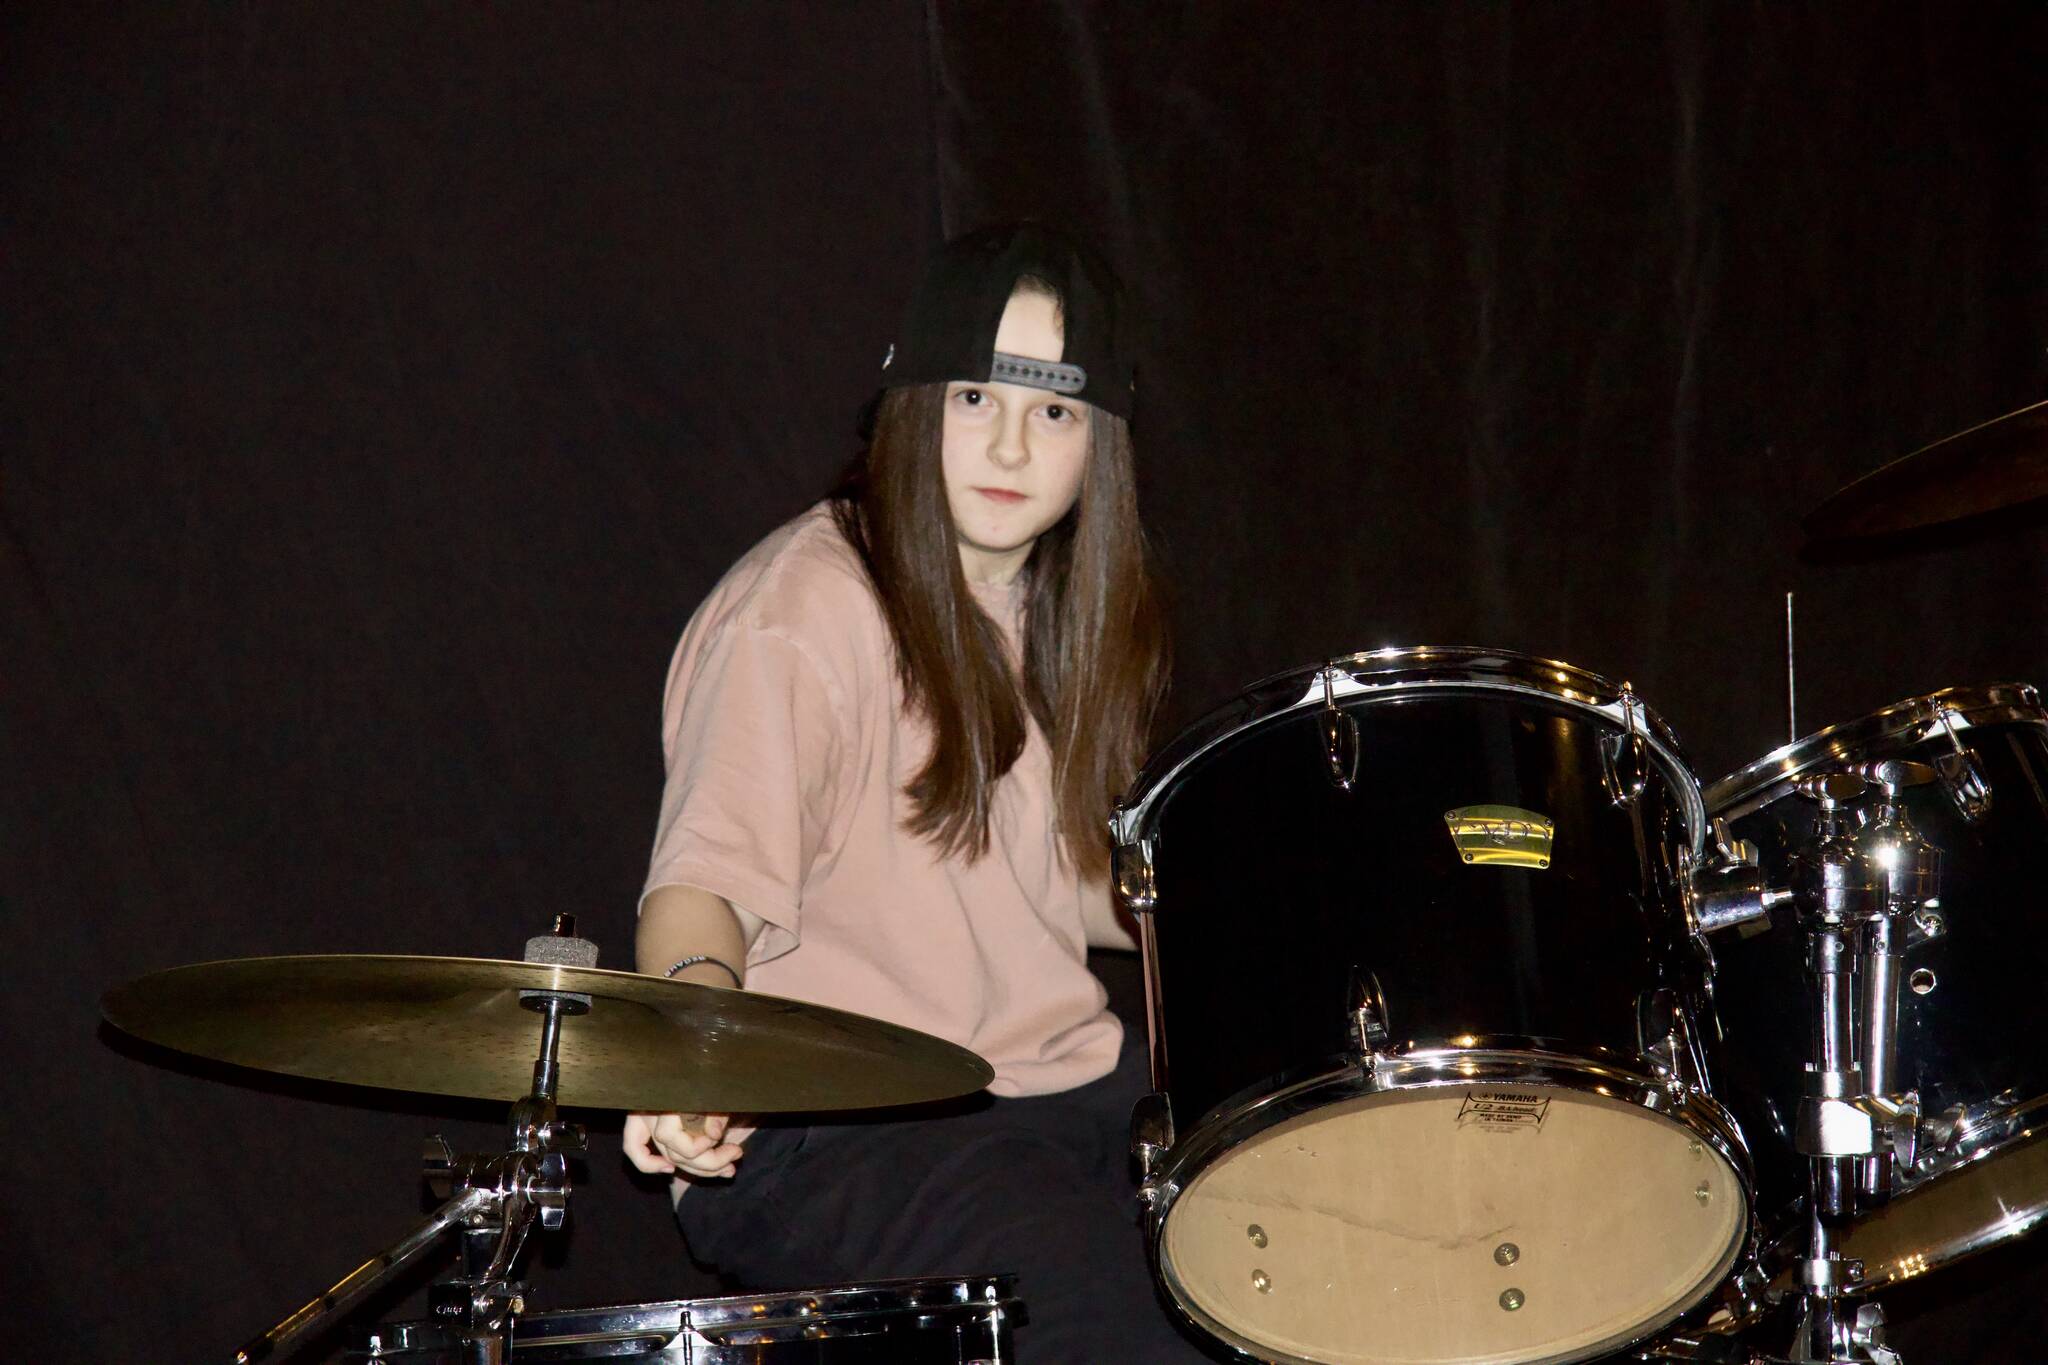 Photo by Rachel Rosen/Whidbey News-Times
Mya Grymes is in 8th grade and is the drummer for the band.